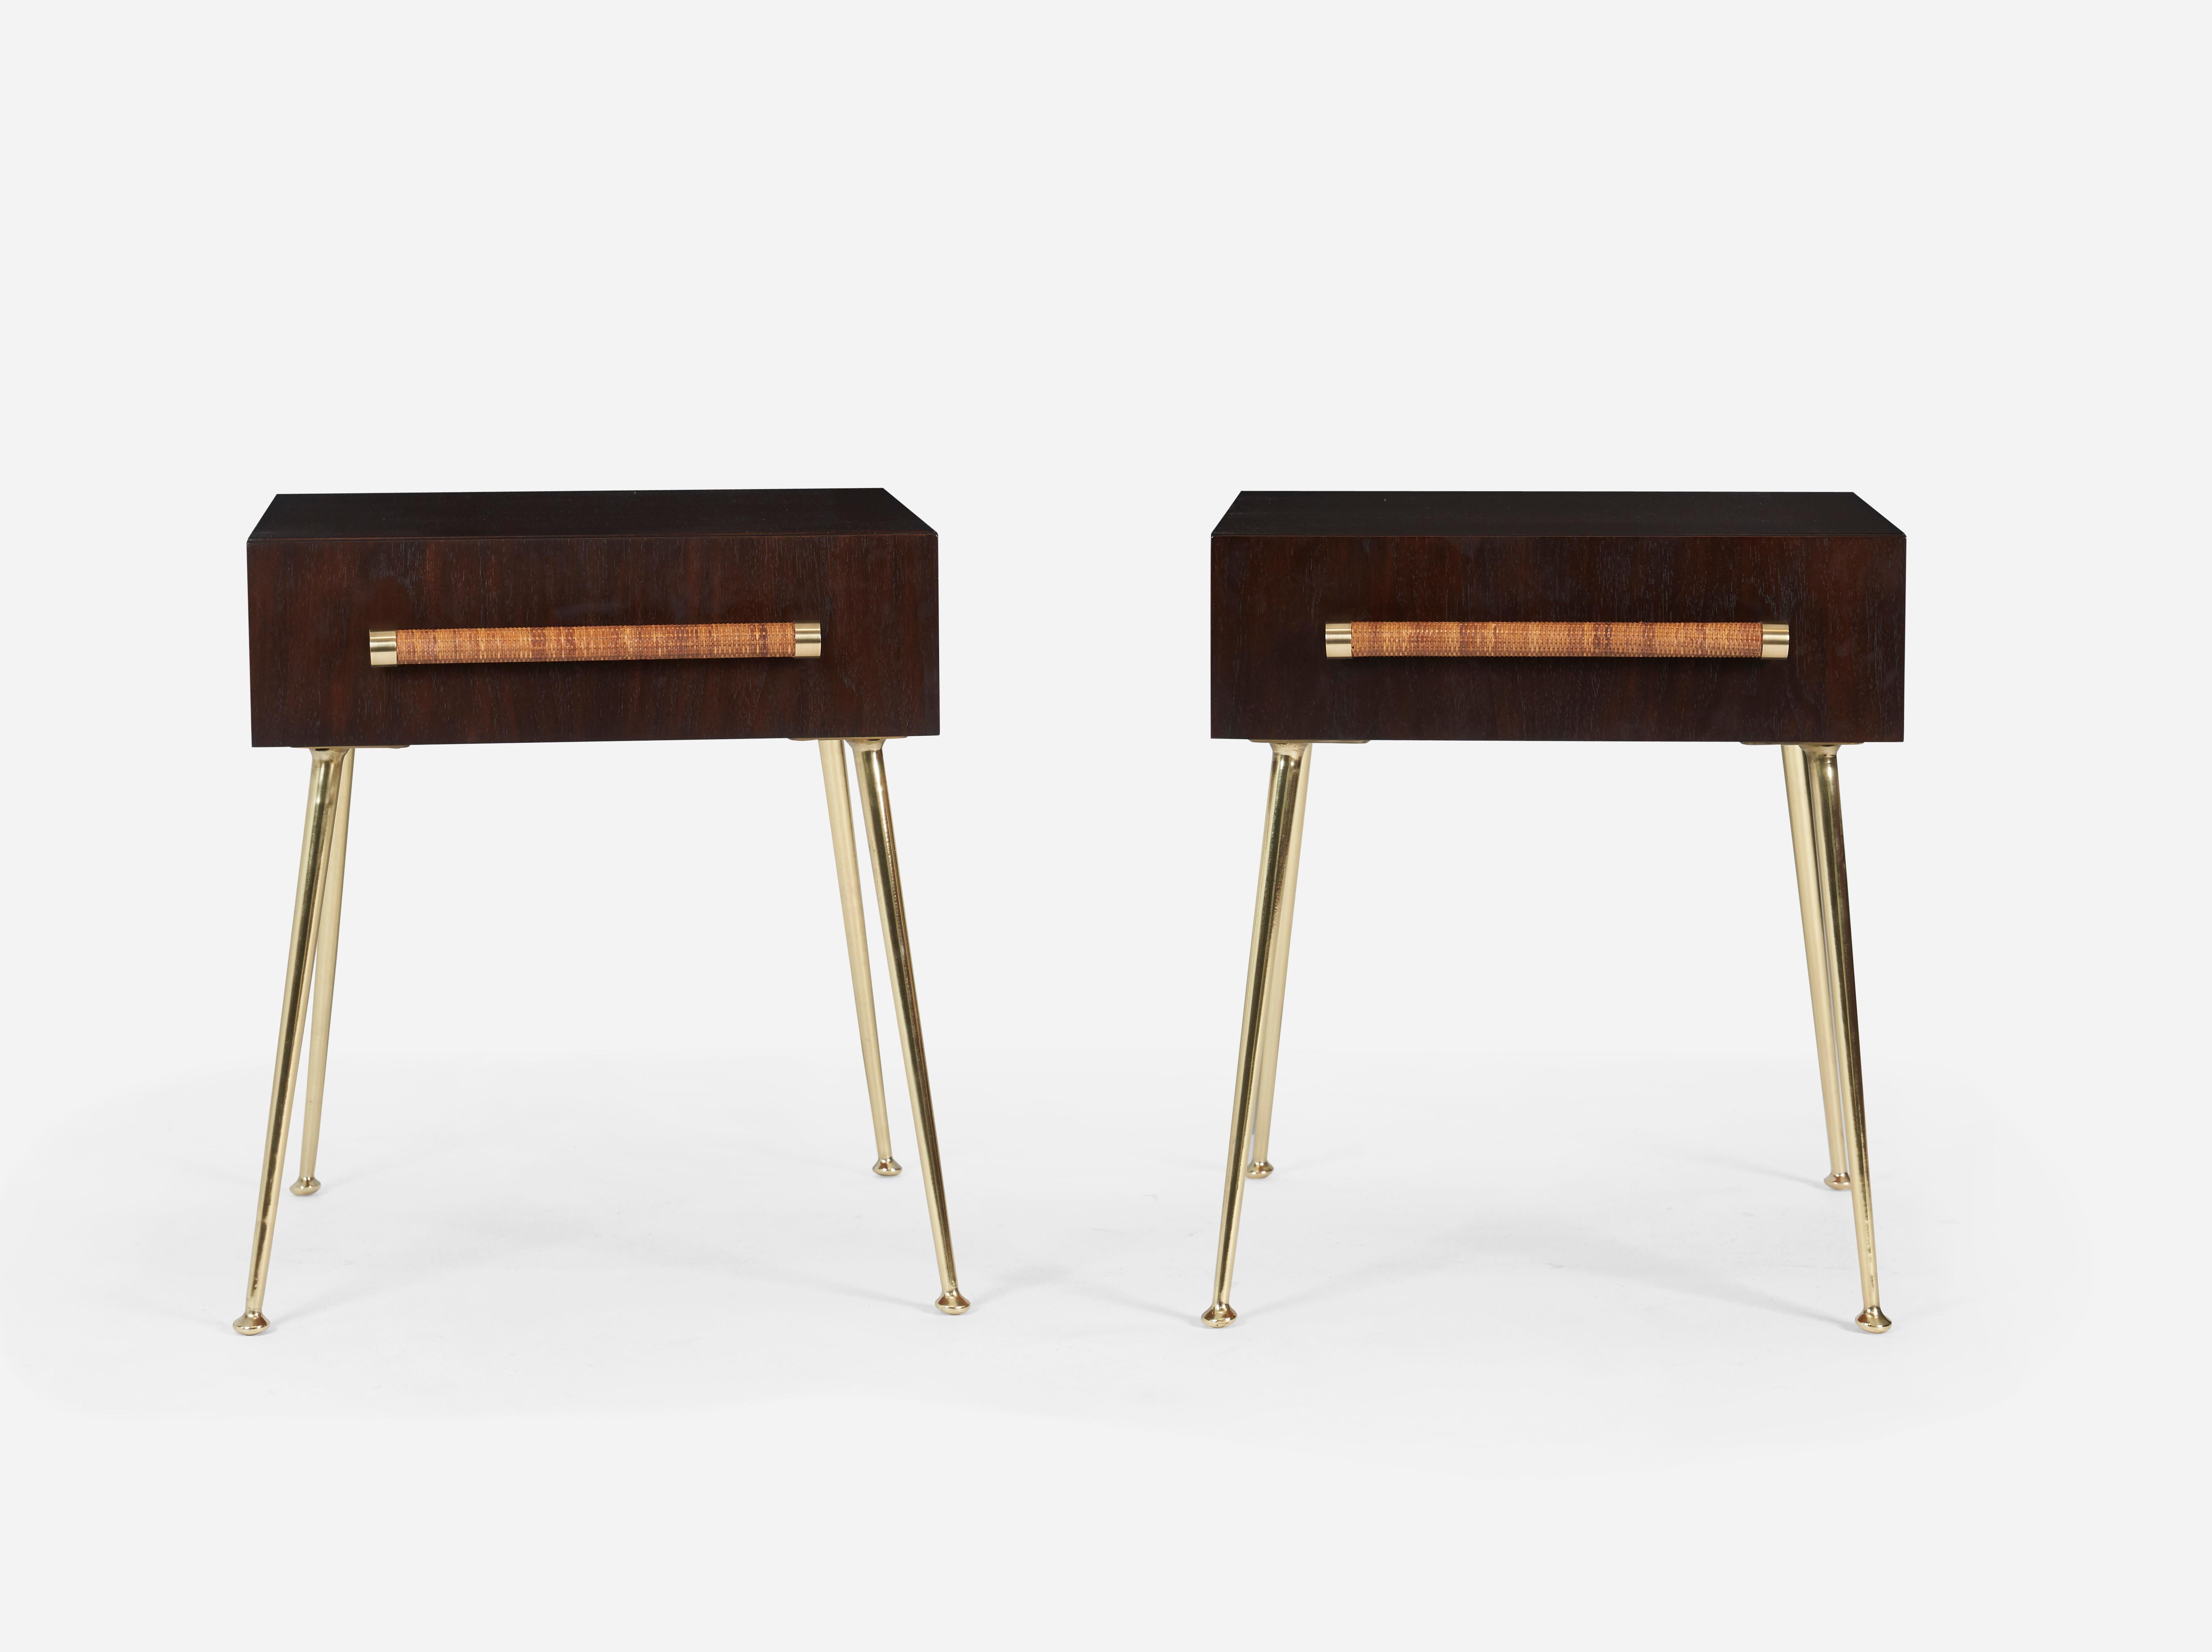 Nightstand/End tables by T. H. Robsjohn-Gibbings for Widdicomb. Fully restored and refinished. Dark walnut cases over long brass legs. Cane wrapped handles with brass accents.